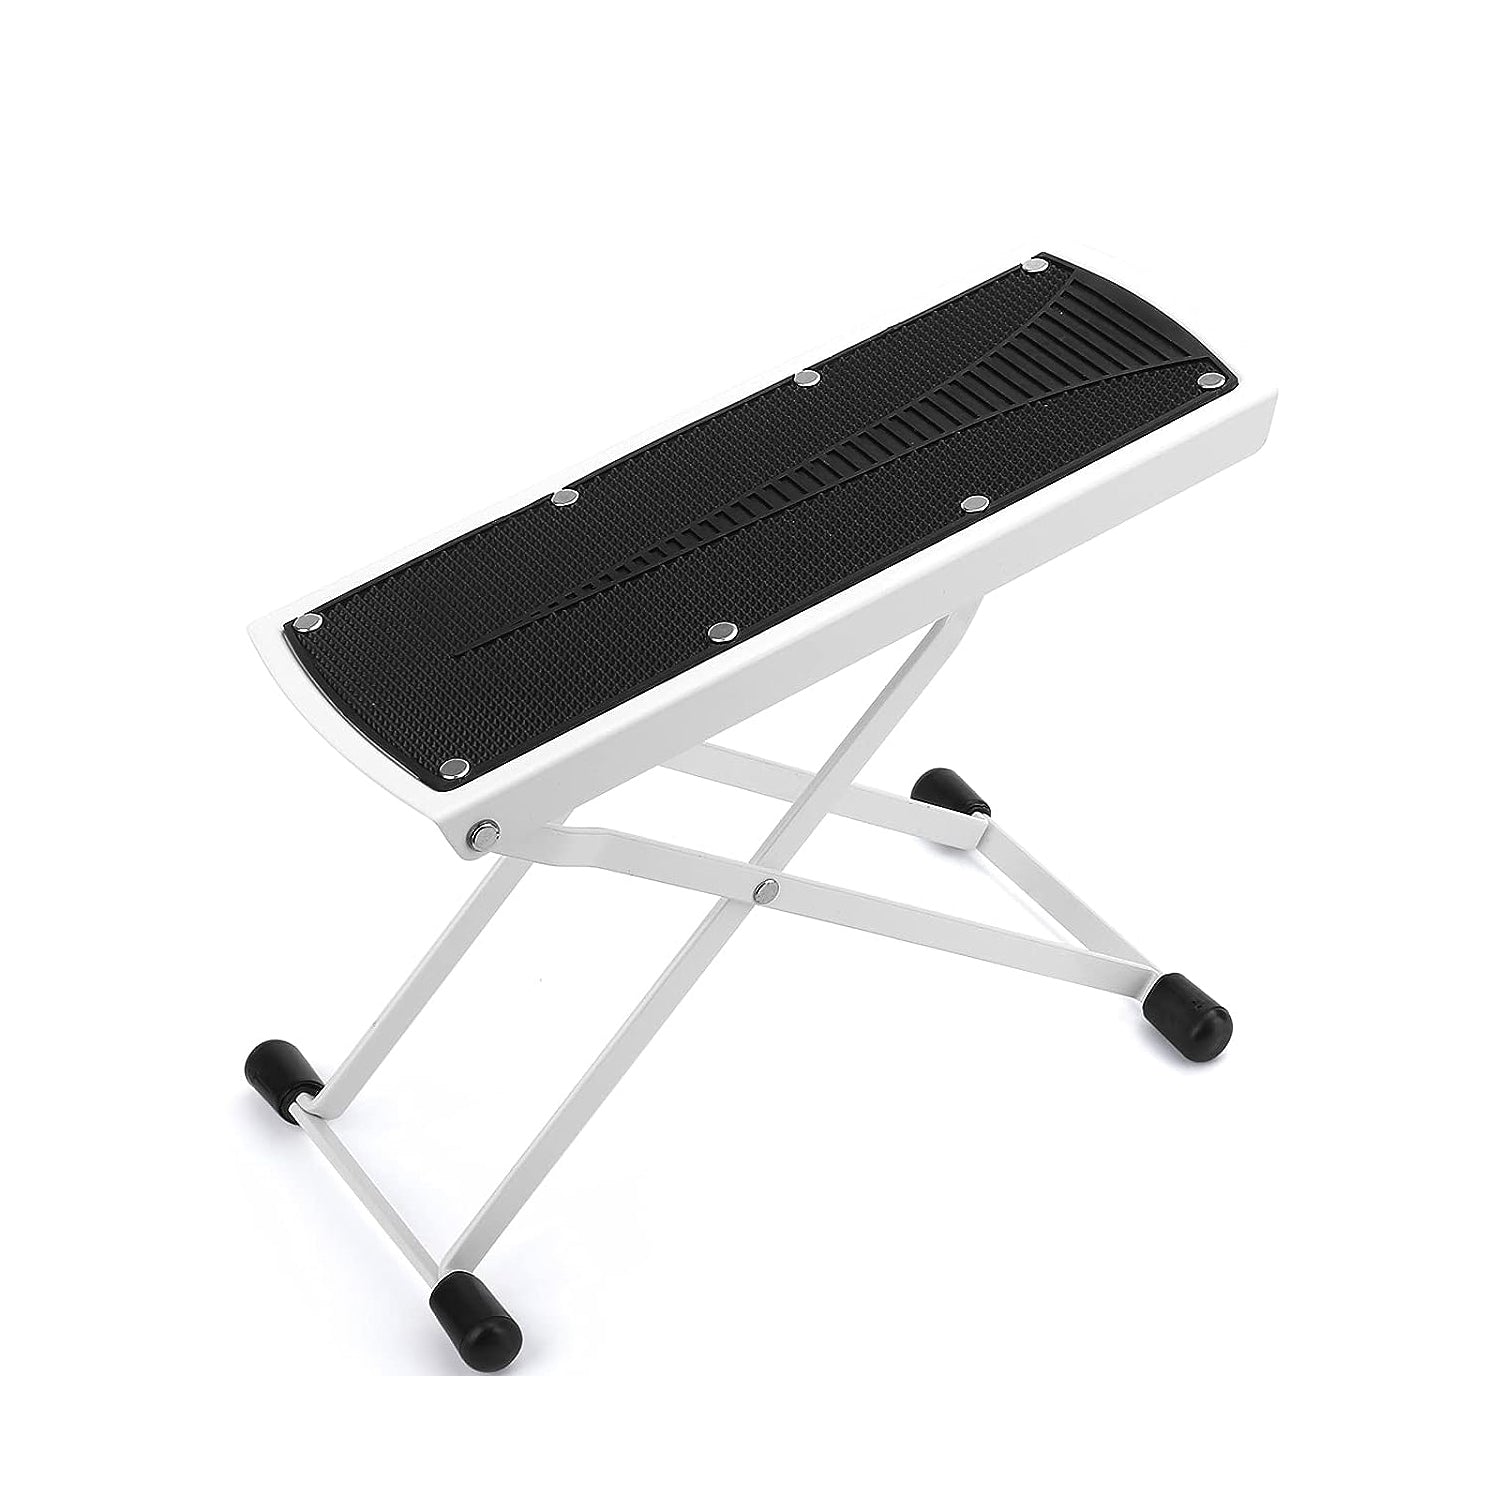 5 Core Guitar Foot Stool 6 Level Height Adjustable Leg Rest Rubber Pad Stable Foot Stand White